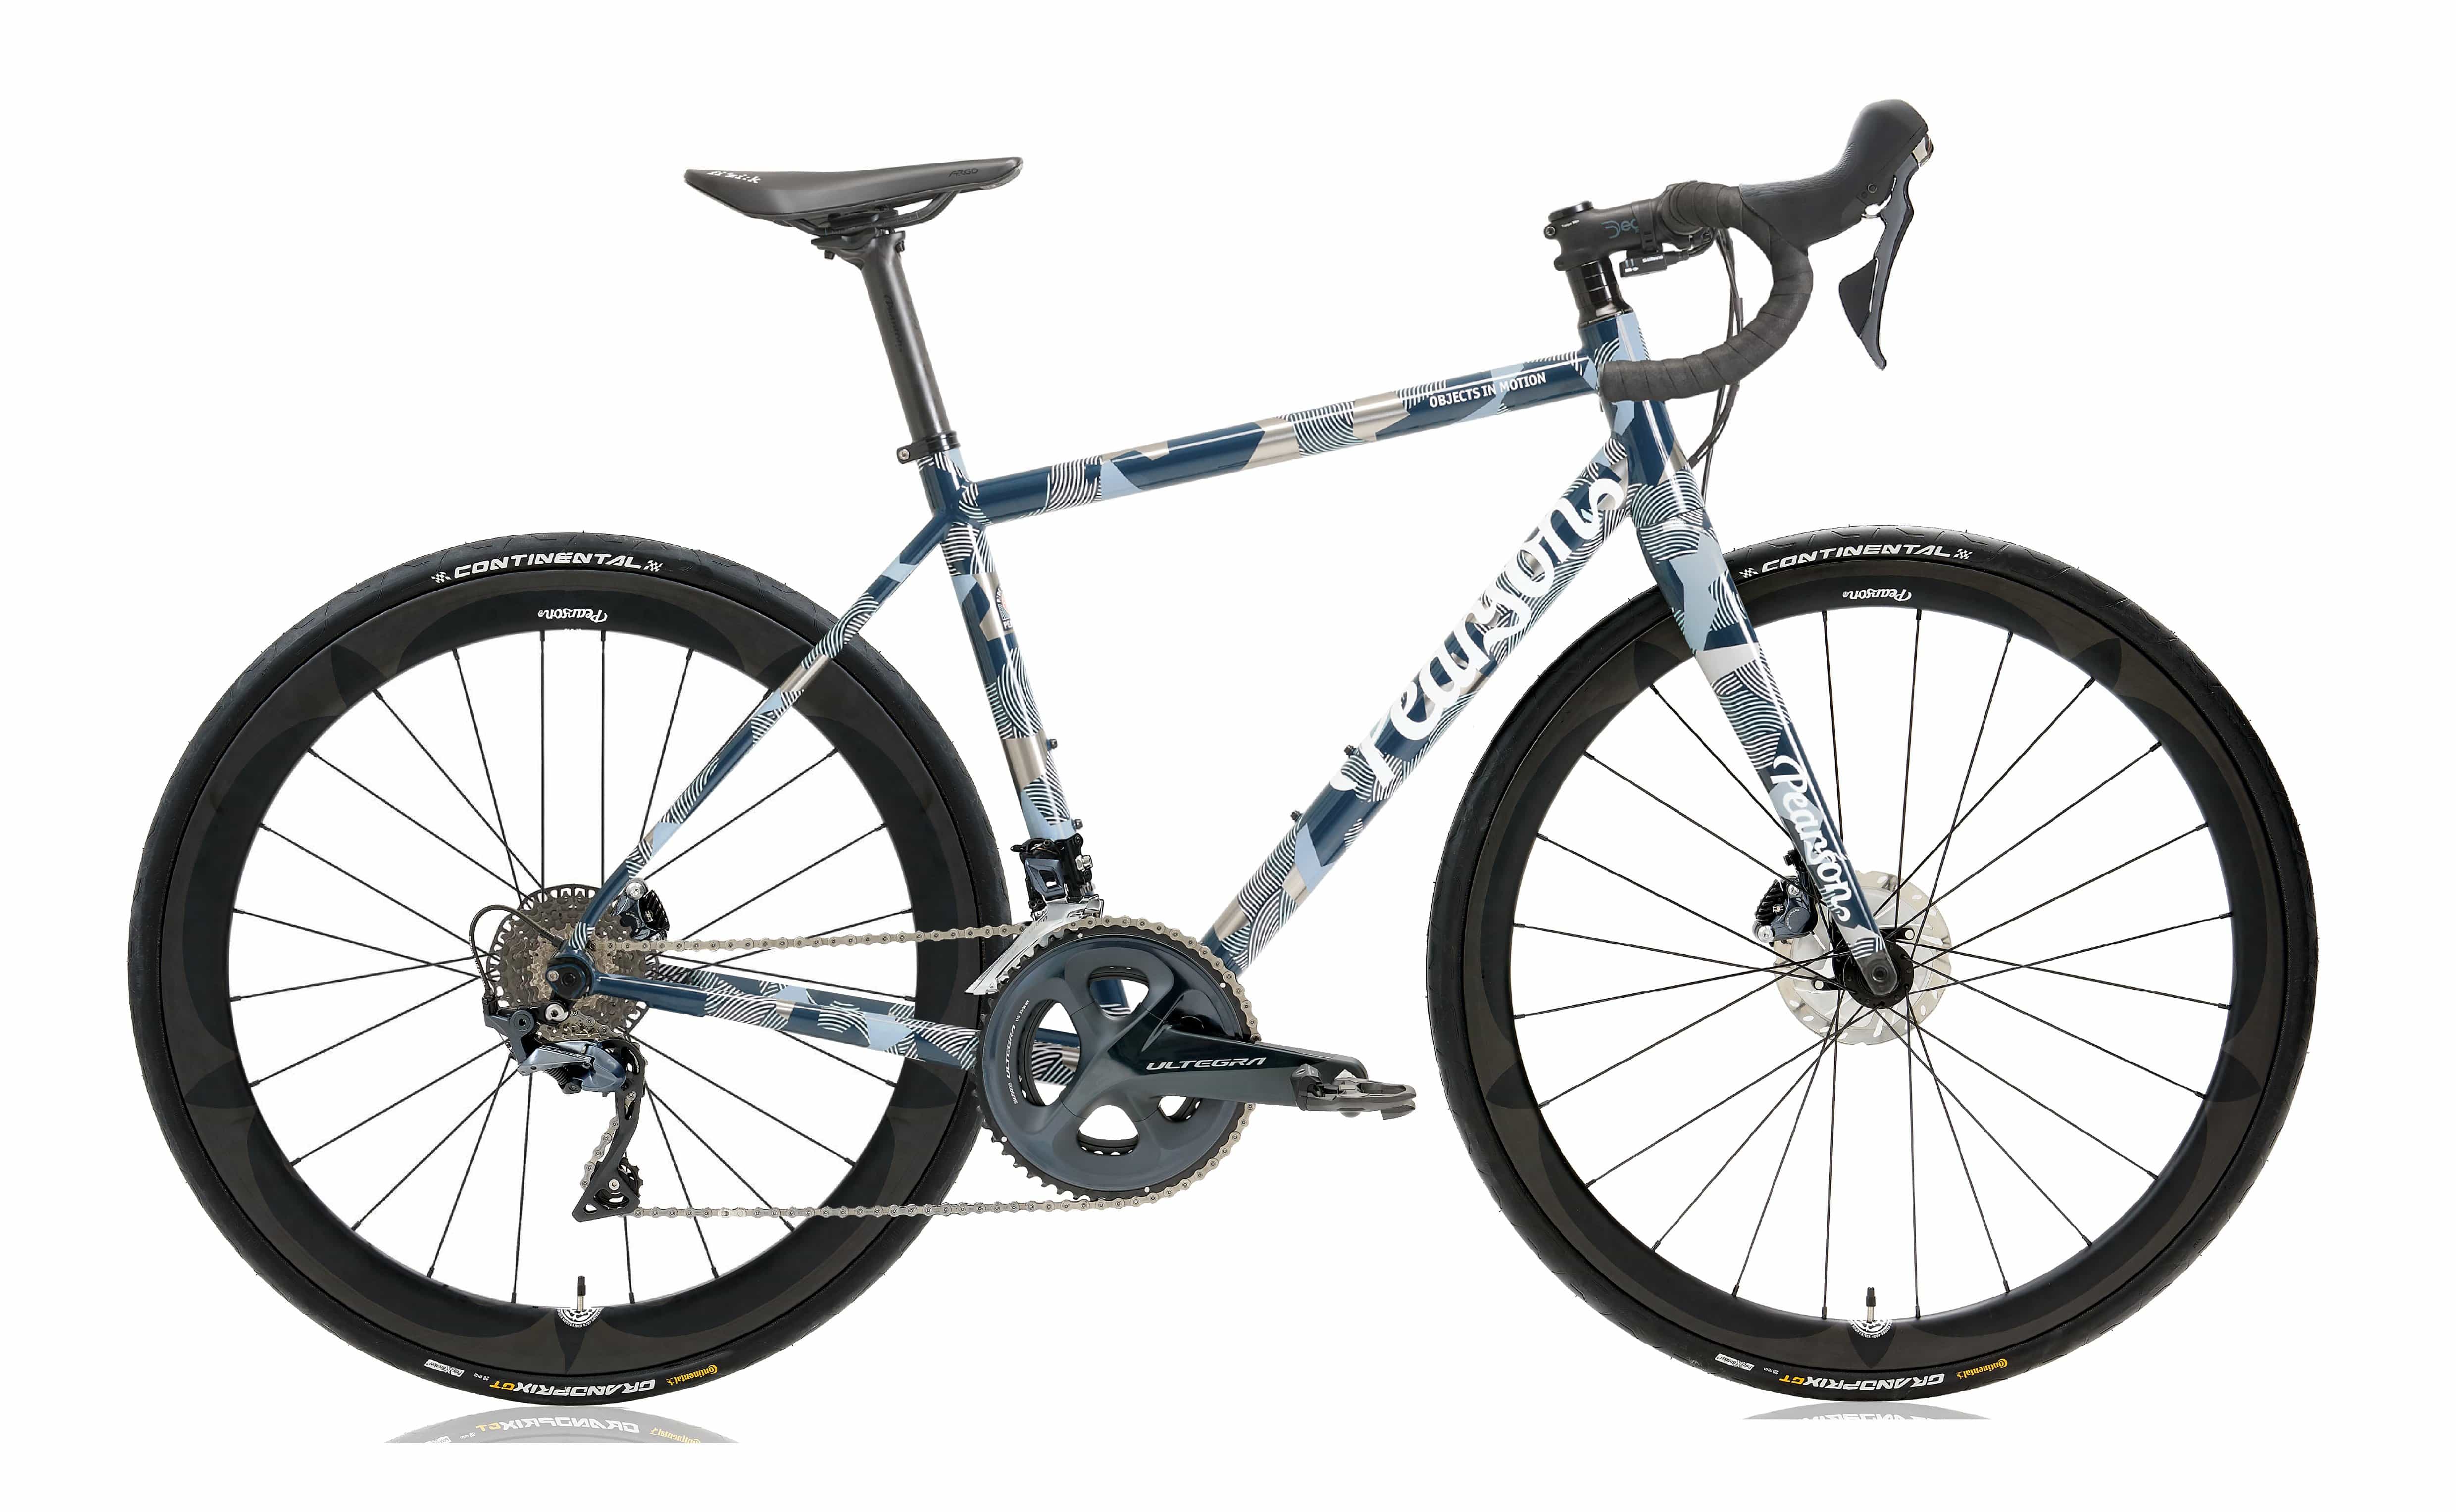 Pcs  Objects In Motion - Titanium Road Bike  Large / Blue Camo / Shimano Ultegra Mechanical - Hoopdriver Cut And Thrust Carbon Wheels